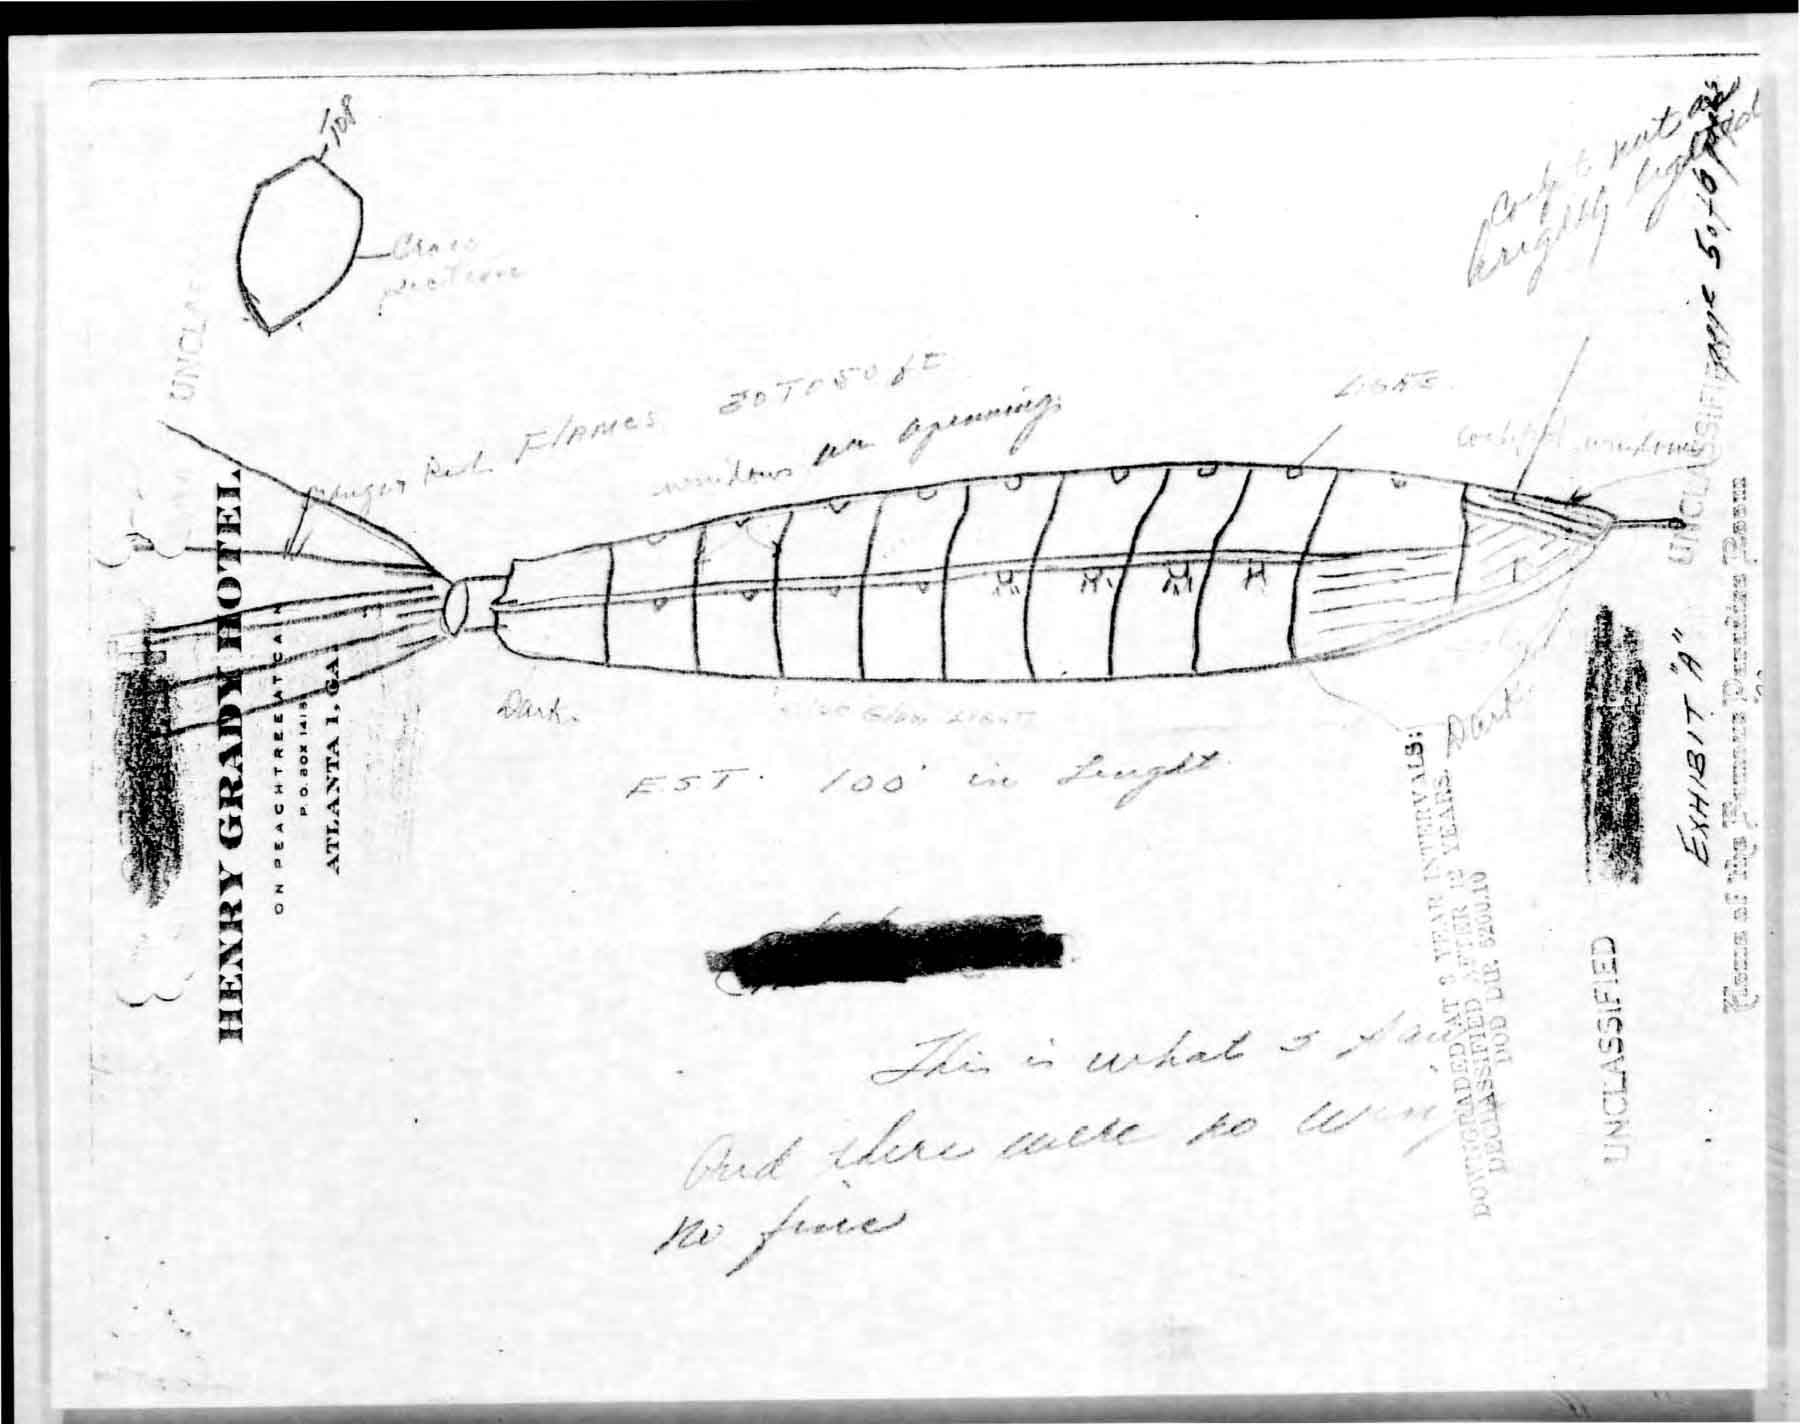 Sketch of object witnessed by pilot Chiles, made at an Atlanta hotel on July 26.